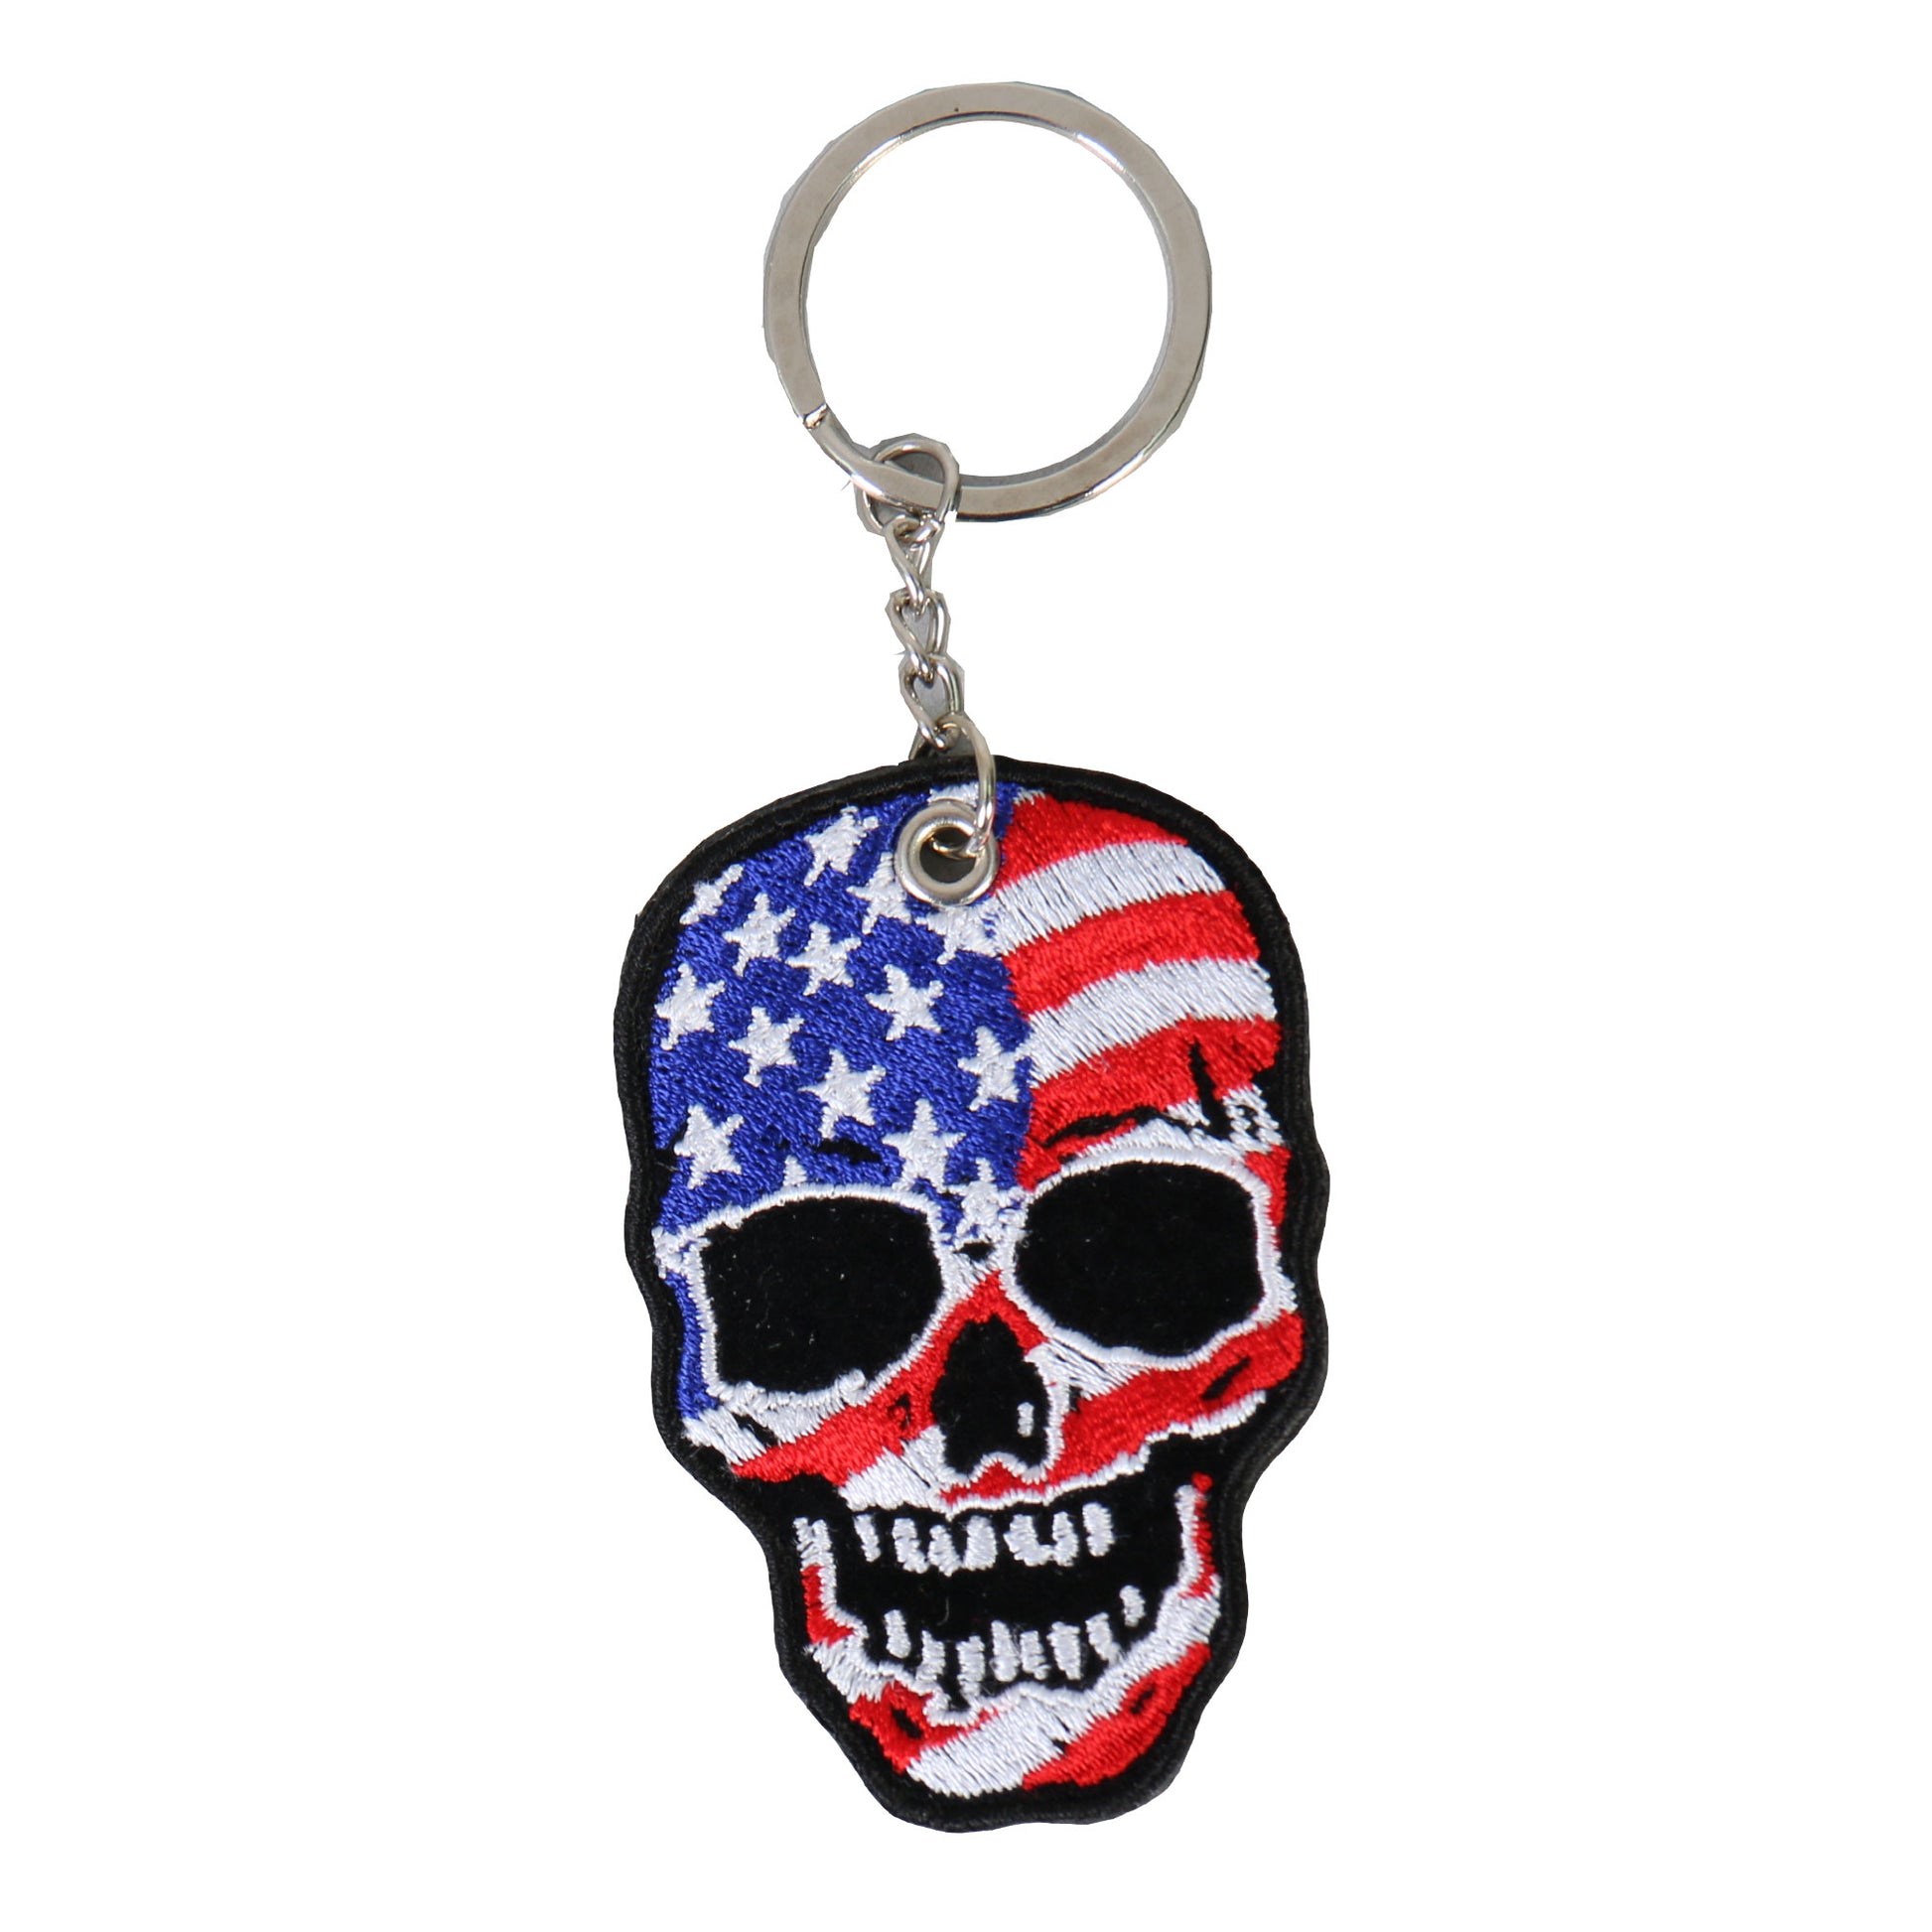 Hot Leathers KCH1013 American Flag Skull Embroidered Key Chain